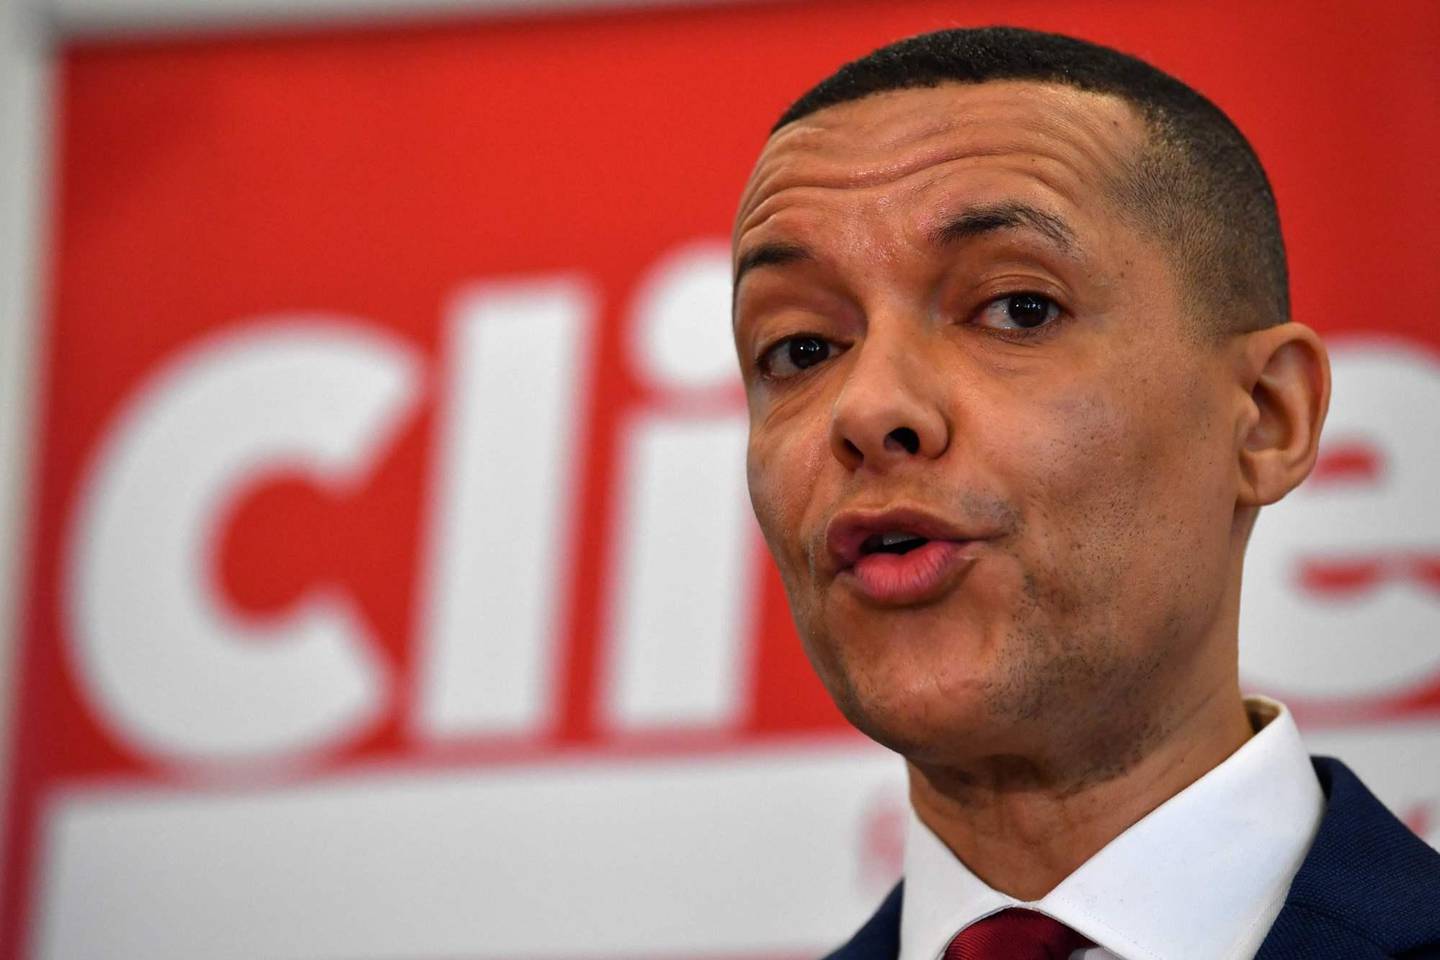 British Labour politician, Member of Parliament (MP) for Norwich South and Labour leadership hopeful Clive Lewis sets out his vision for the party at an event in Brixton, south London on January 10, 2020. - Britain's main opposition Labour Party on January 7, 2020, opened nominations for candidates to replace Jeremy Corbyn as leader after a disastrous slump in support at recent elections. Voting takes place from February 21 to April 2, with the winner announced two days later. (Photo by Ben STANSALL / AFP)